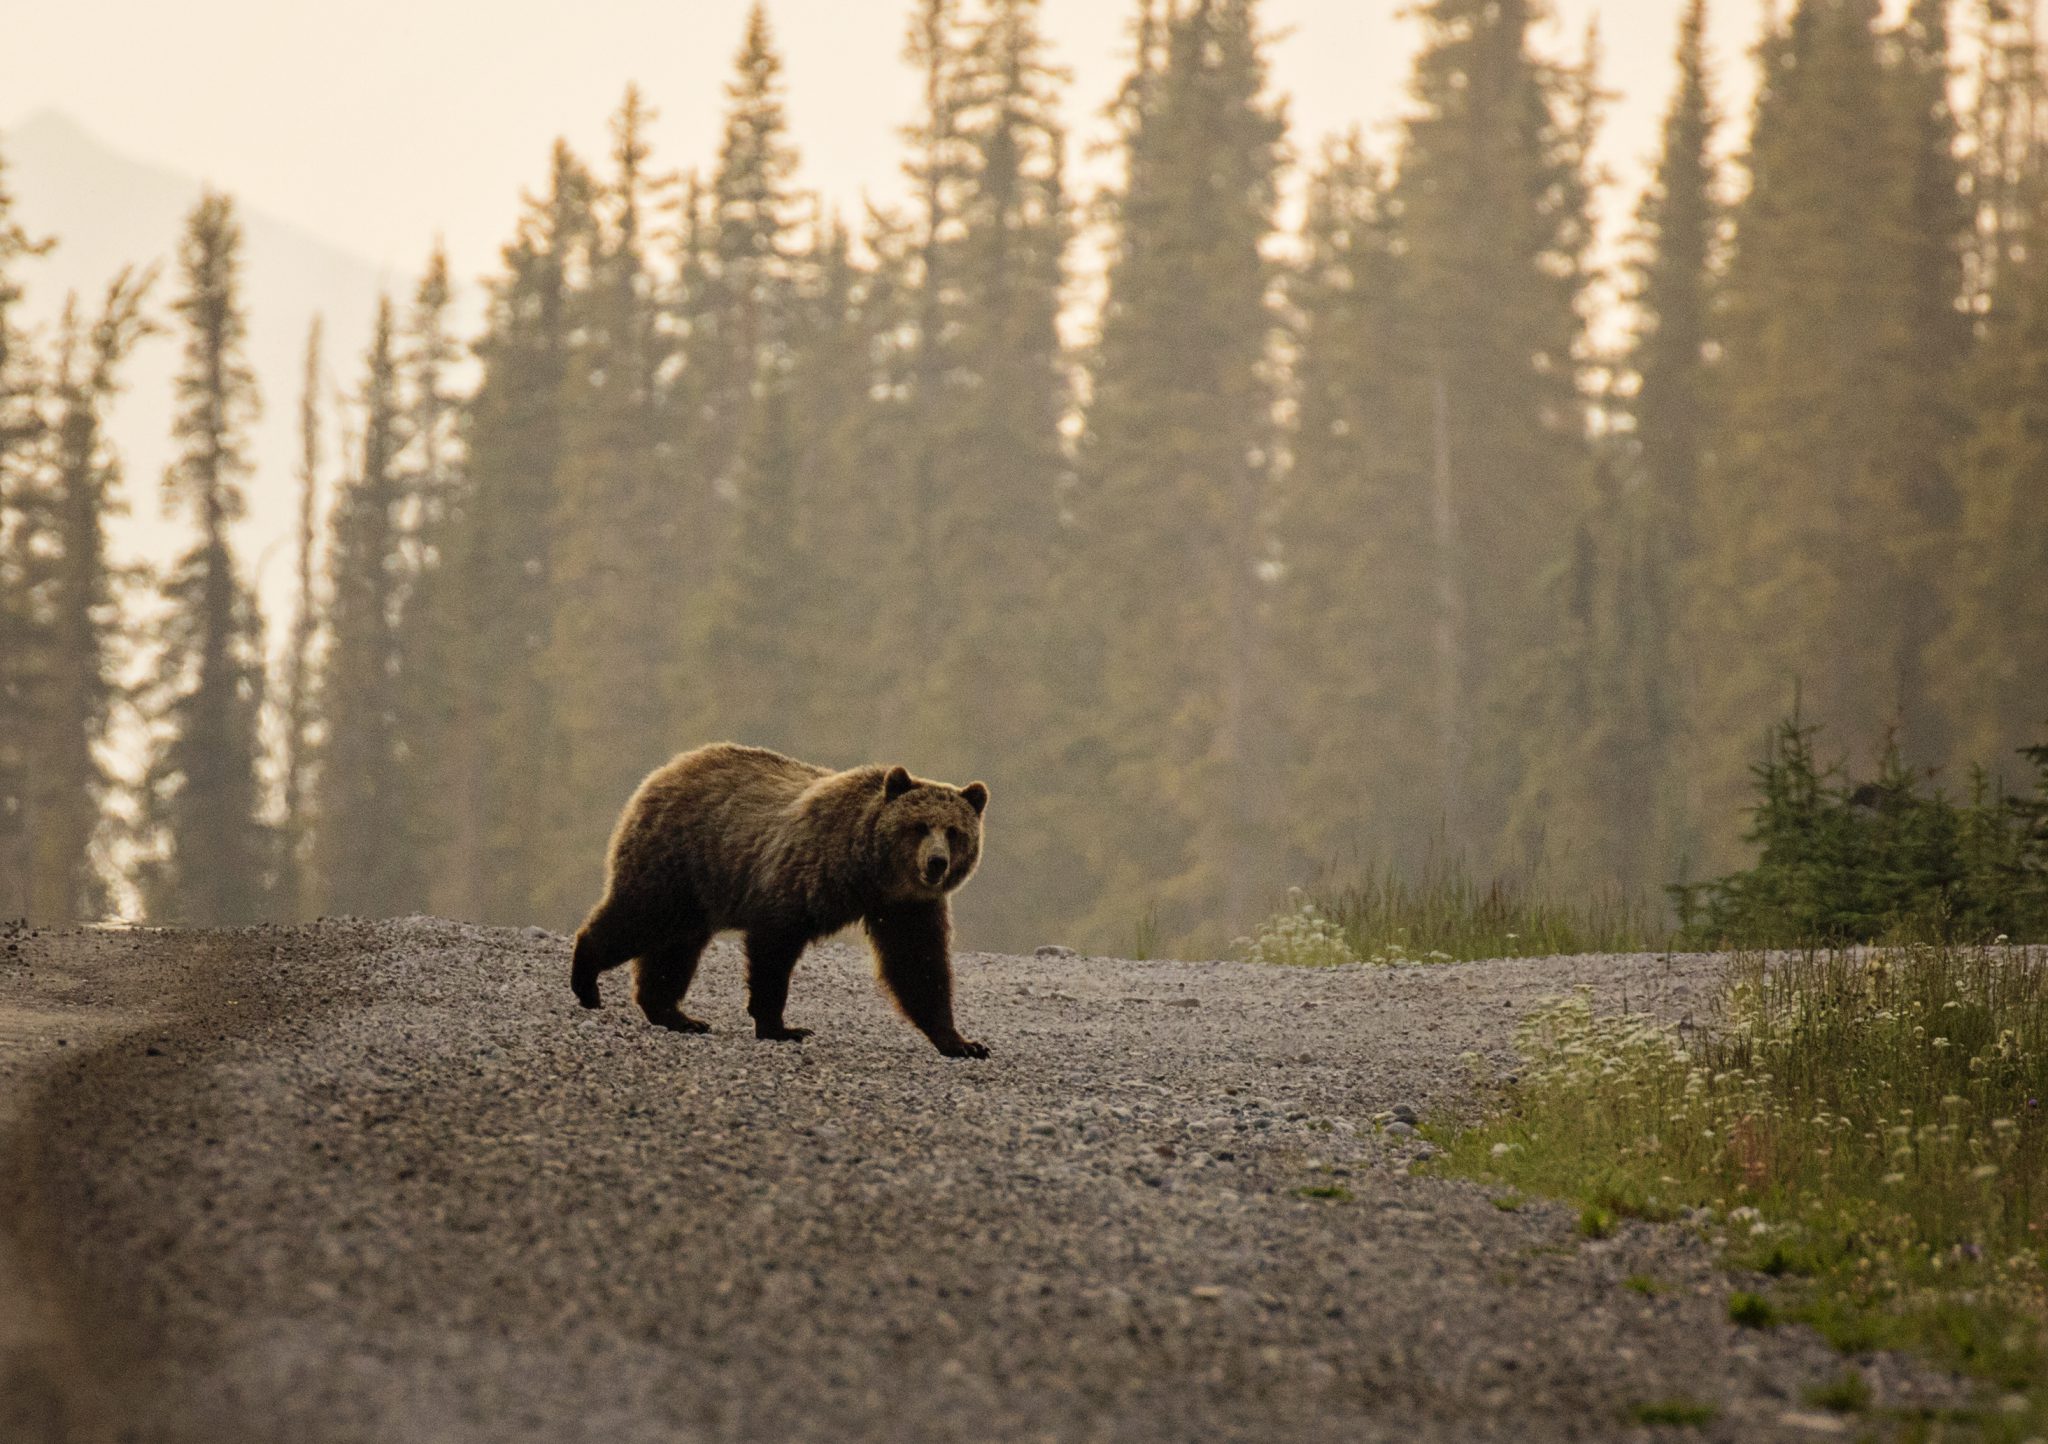 Grizzly Bear crossing the road